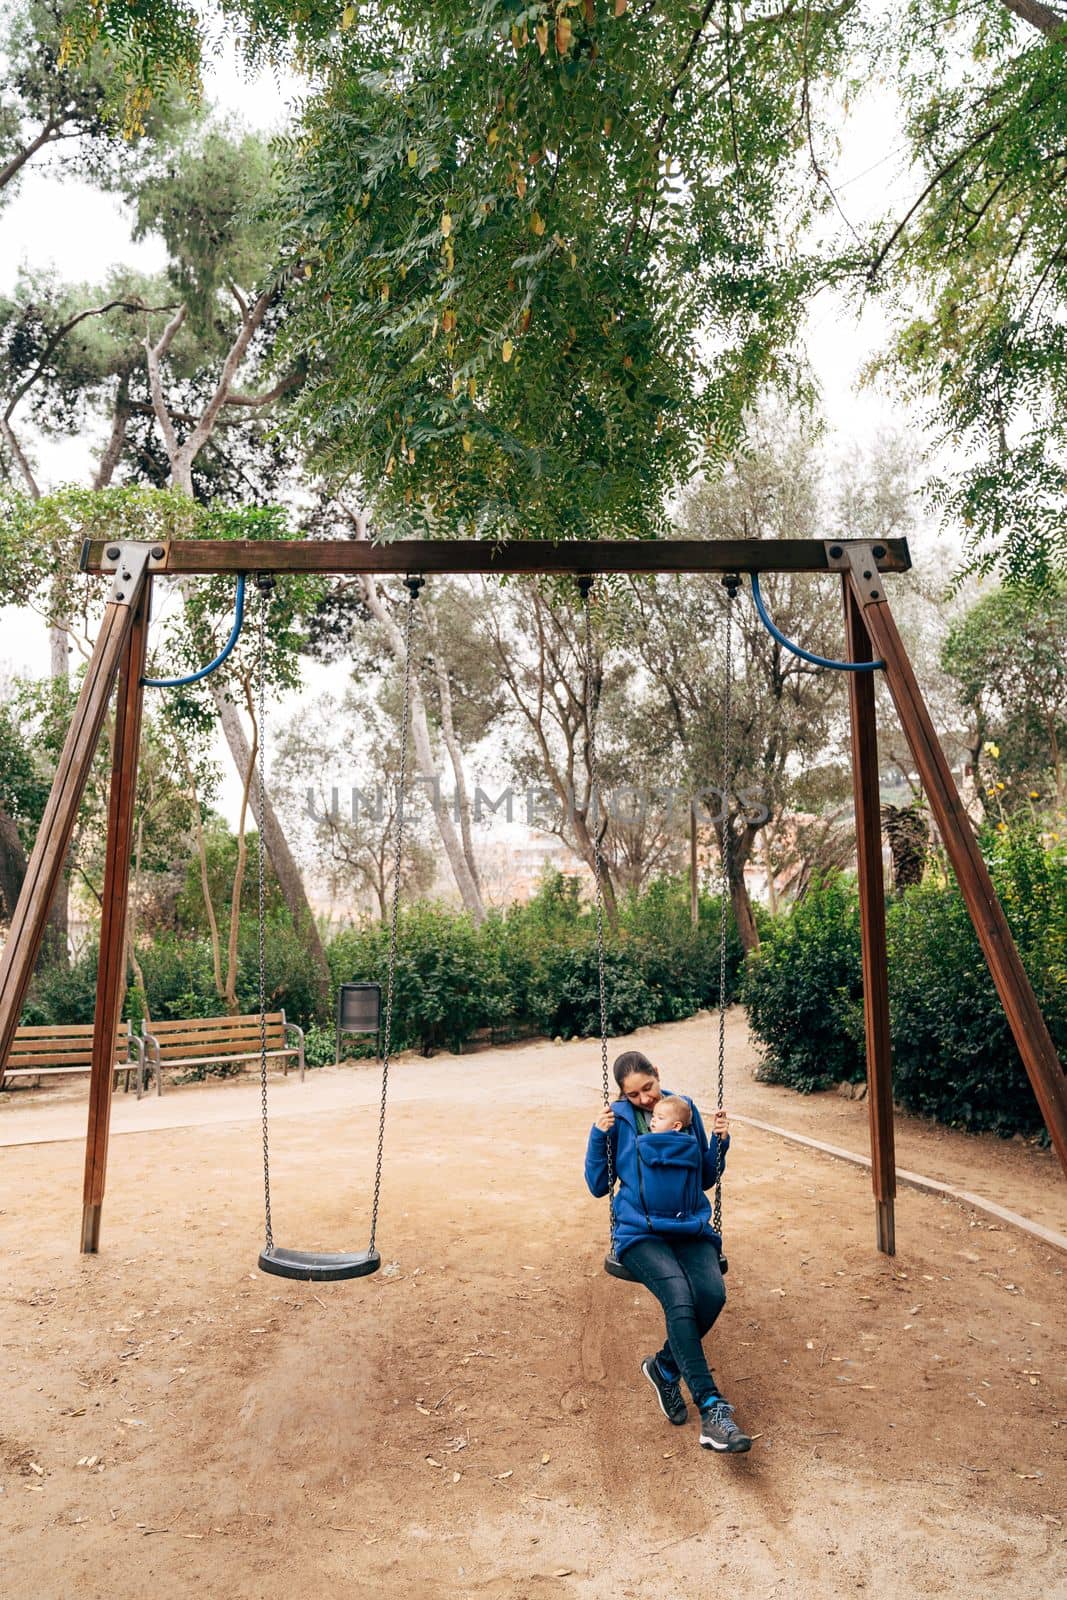 Mom in a blue warm sweater and jeans swinging on a swing with a tiny baby on her chest in the park by Nadtochiy